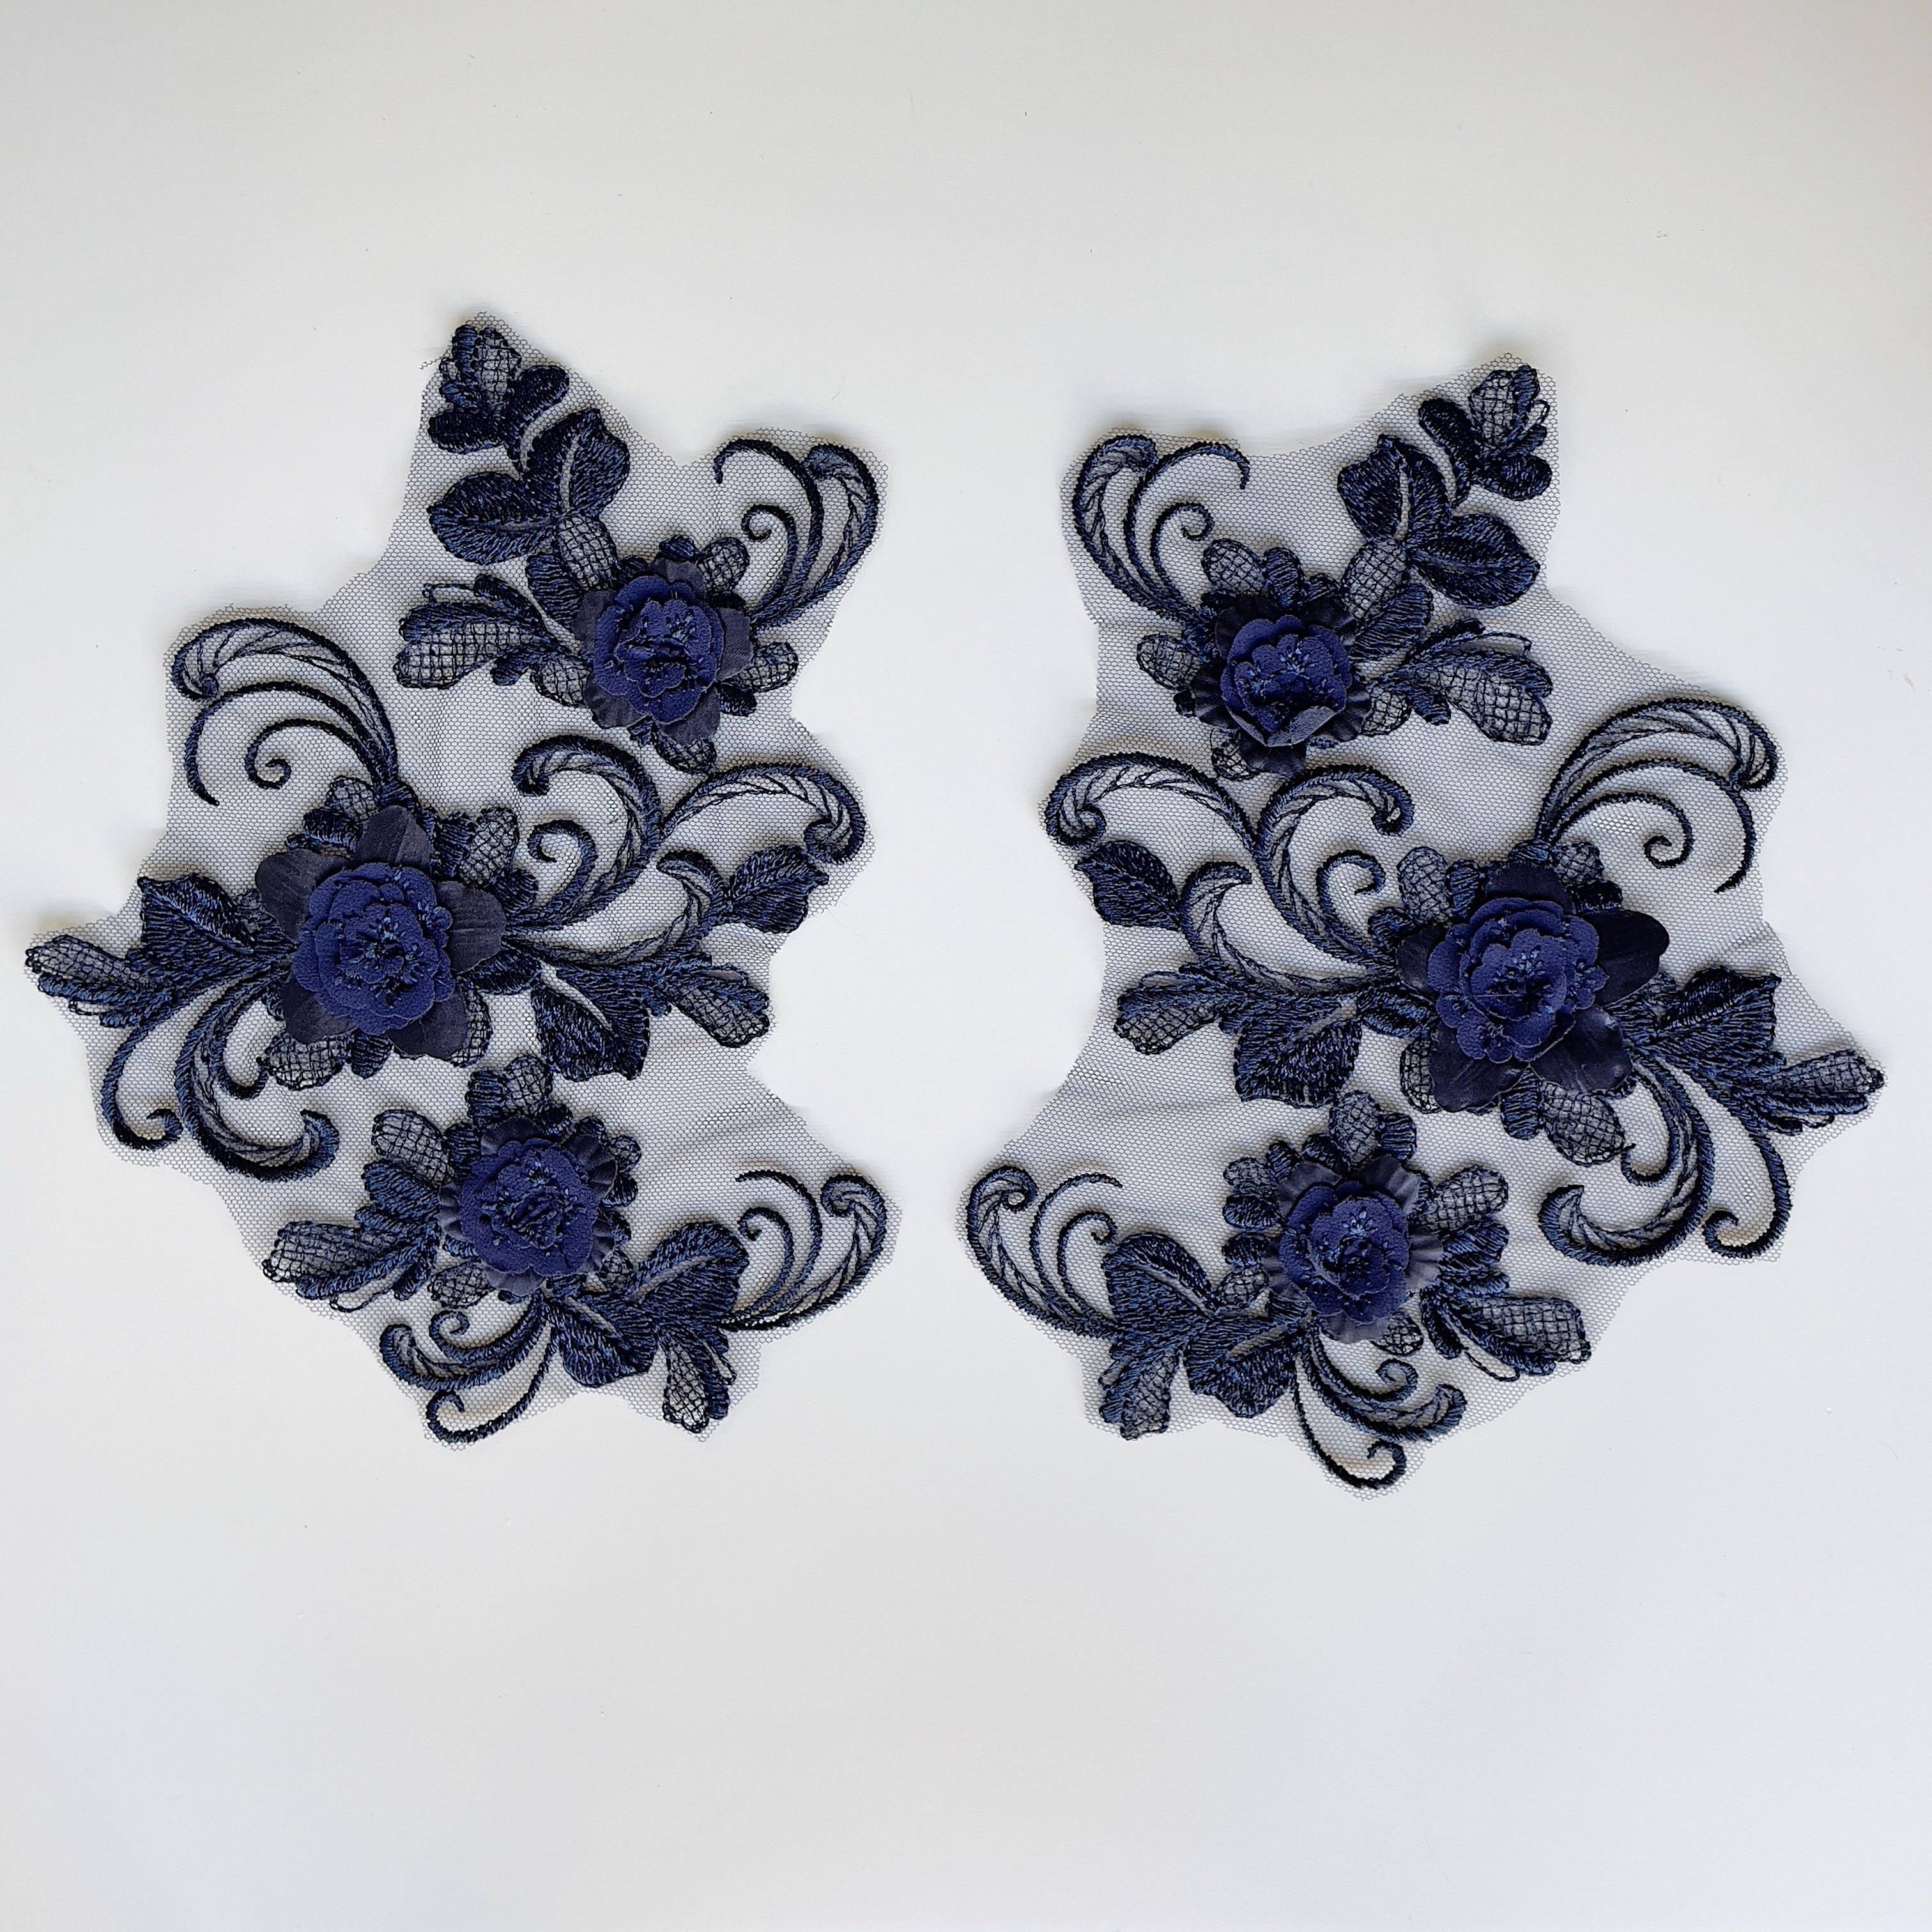 An openwork embroidered black applique pair in a floral design with swirling stems, 3D flowers and crosshatched leaves , laying flat on a white background.